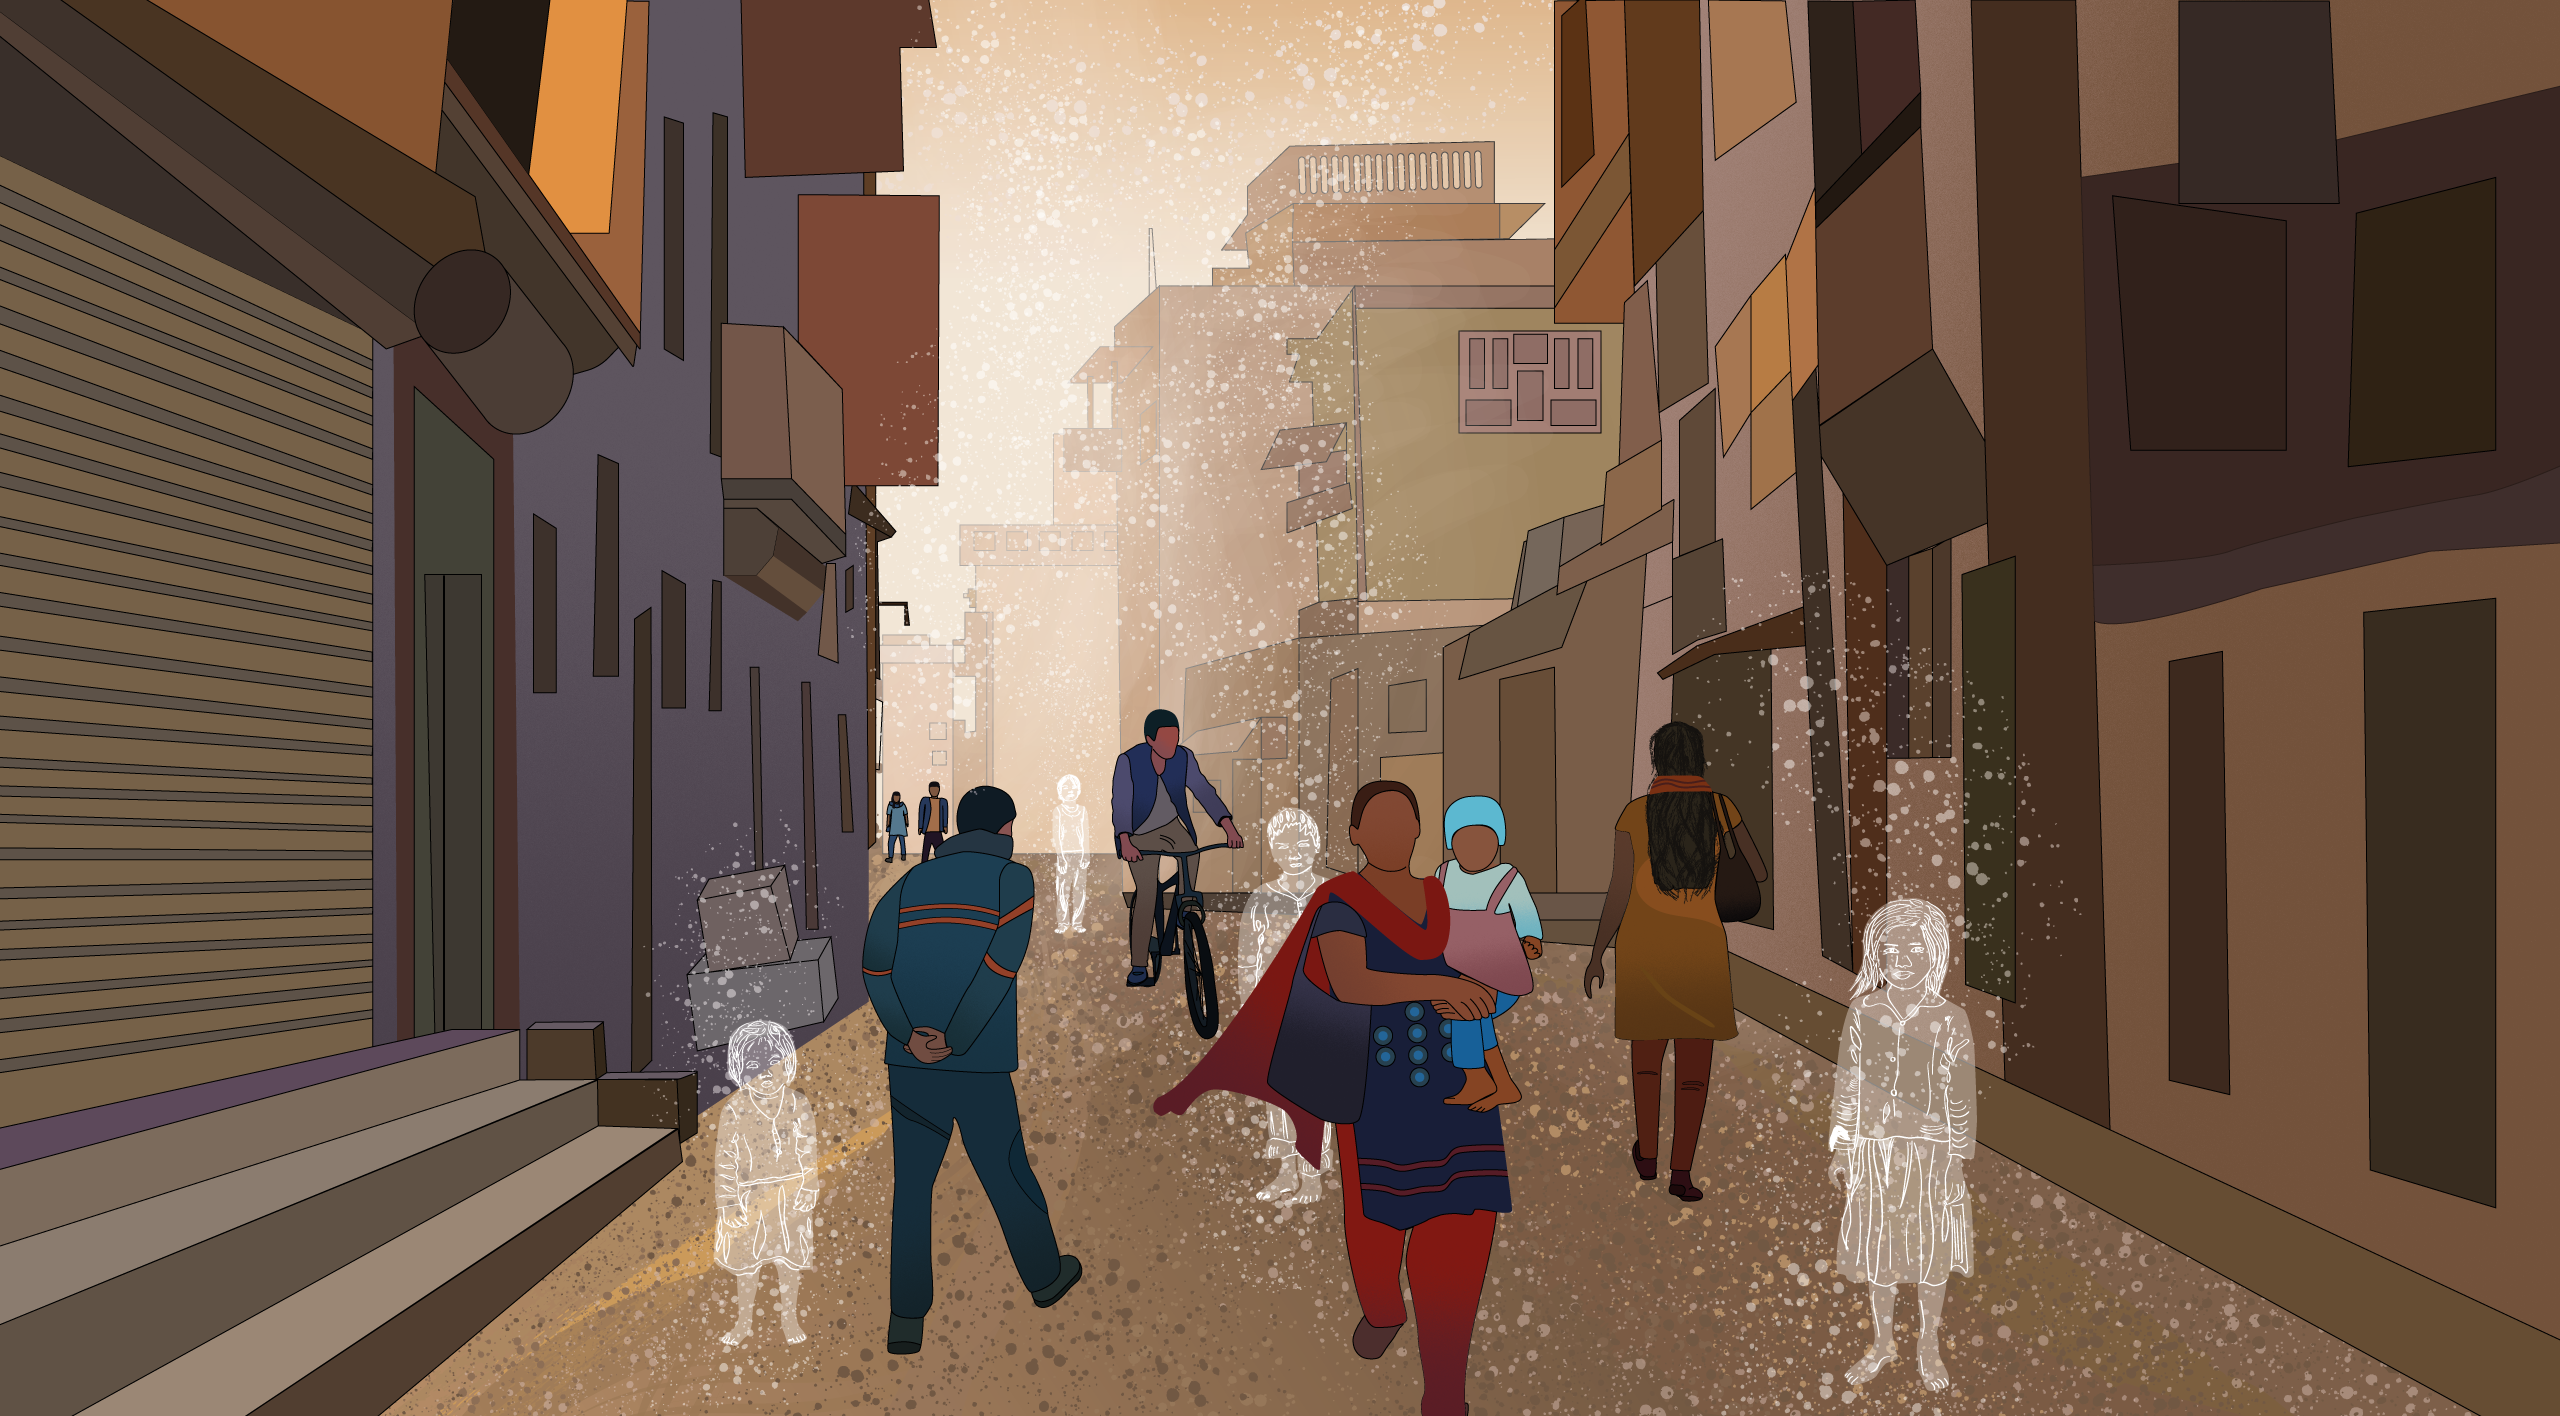 illustration shows children and adults in an alley, with some of the children turning into a silhouette.